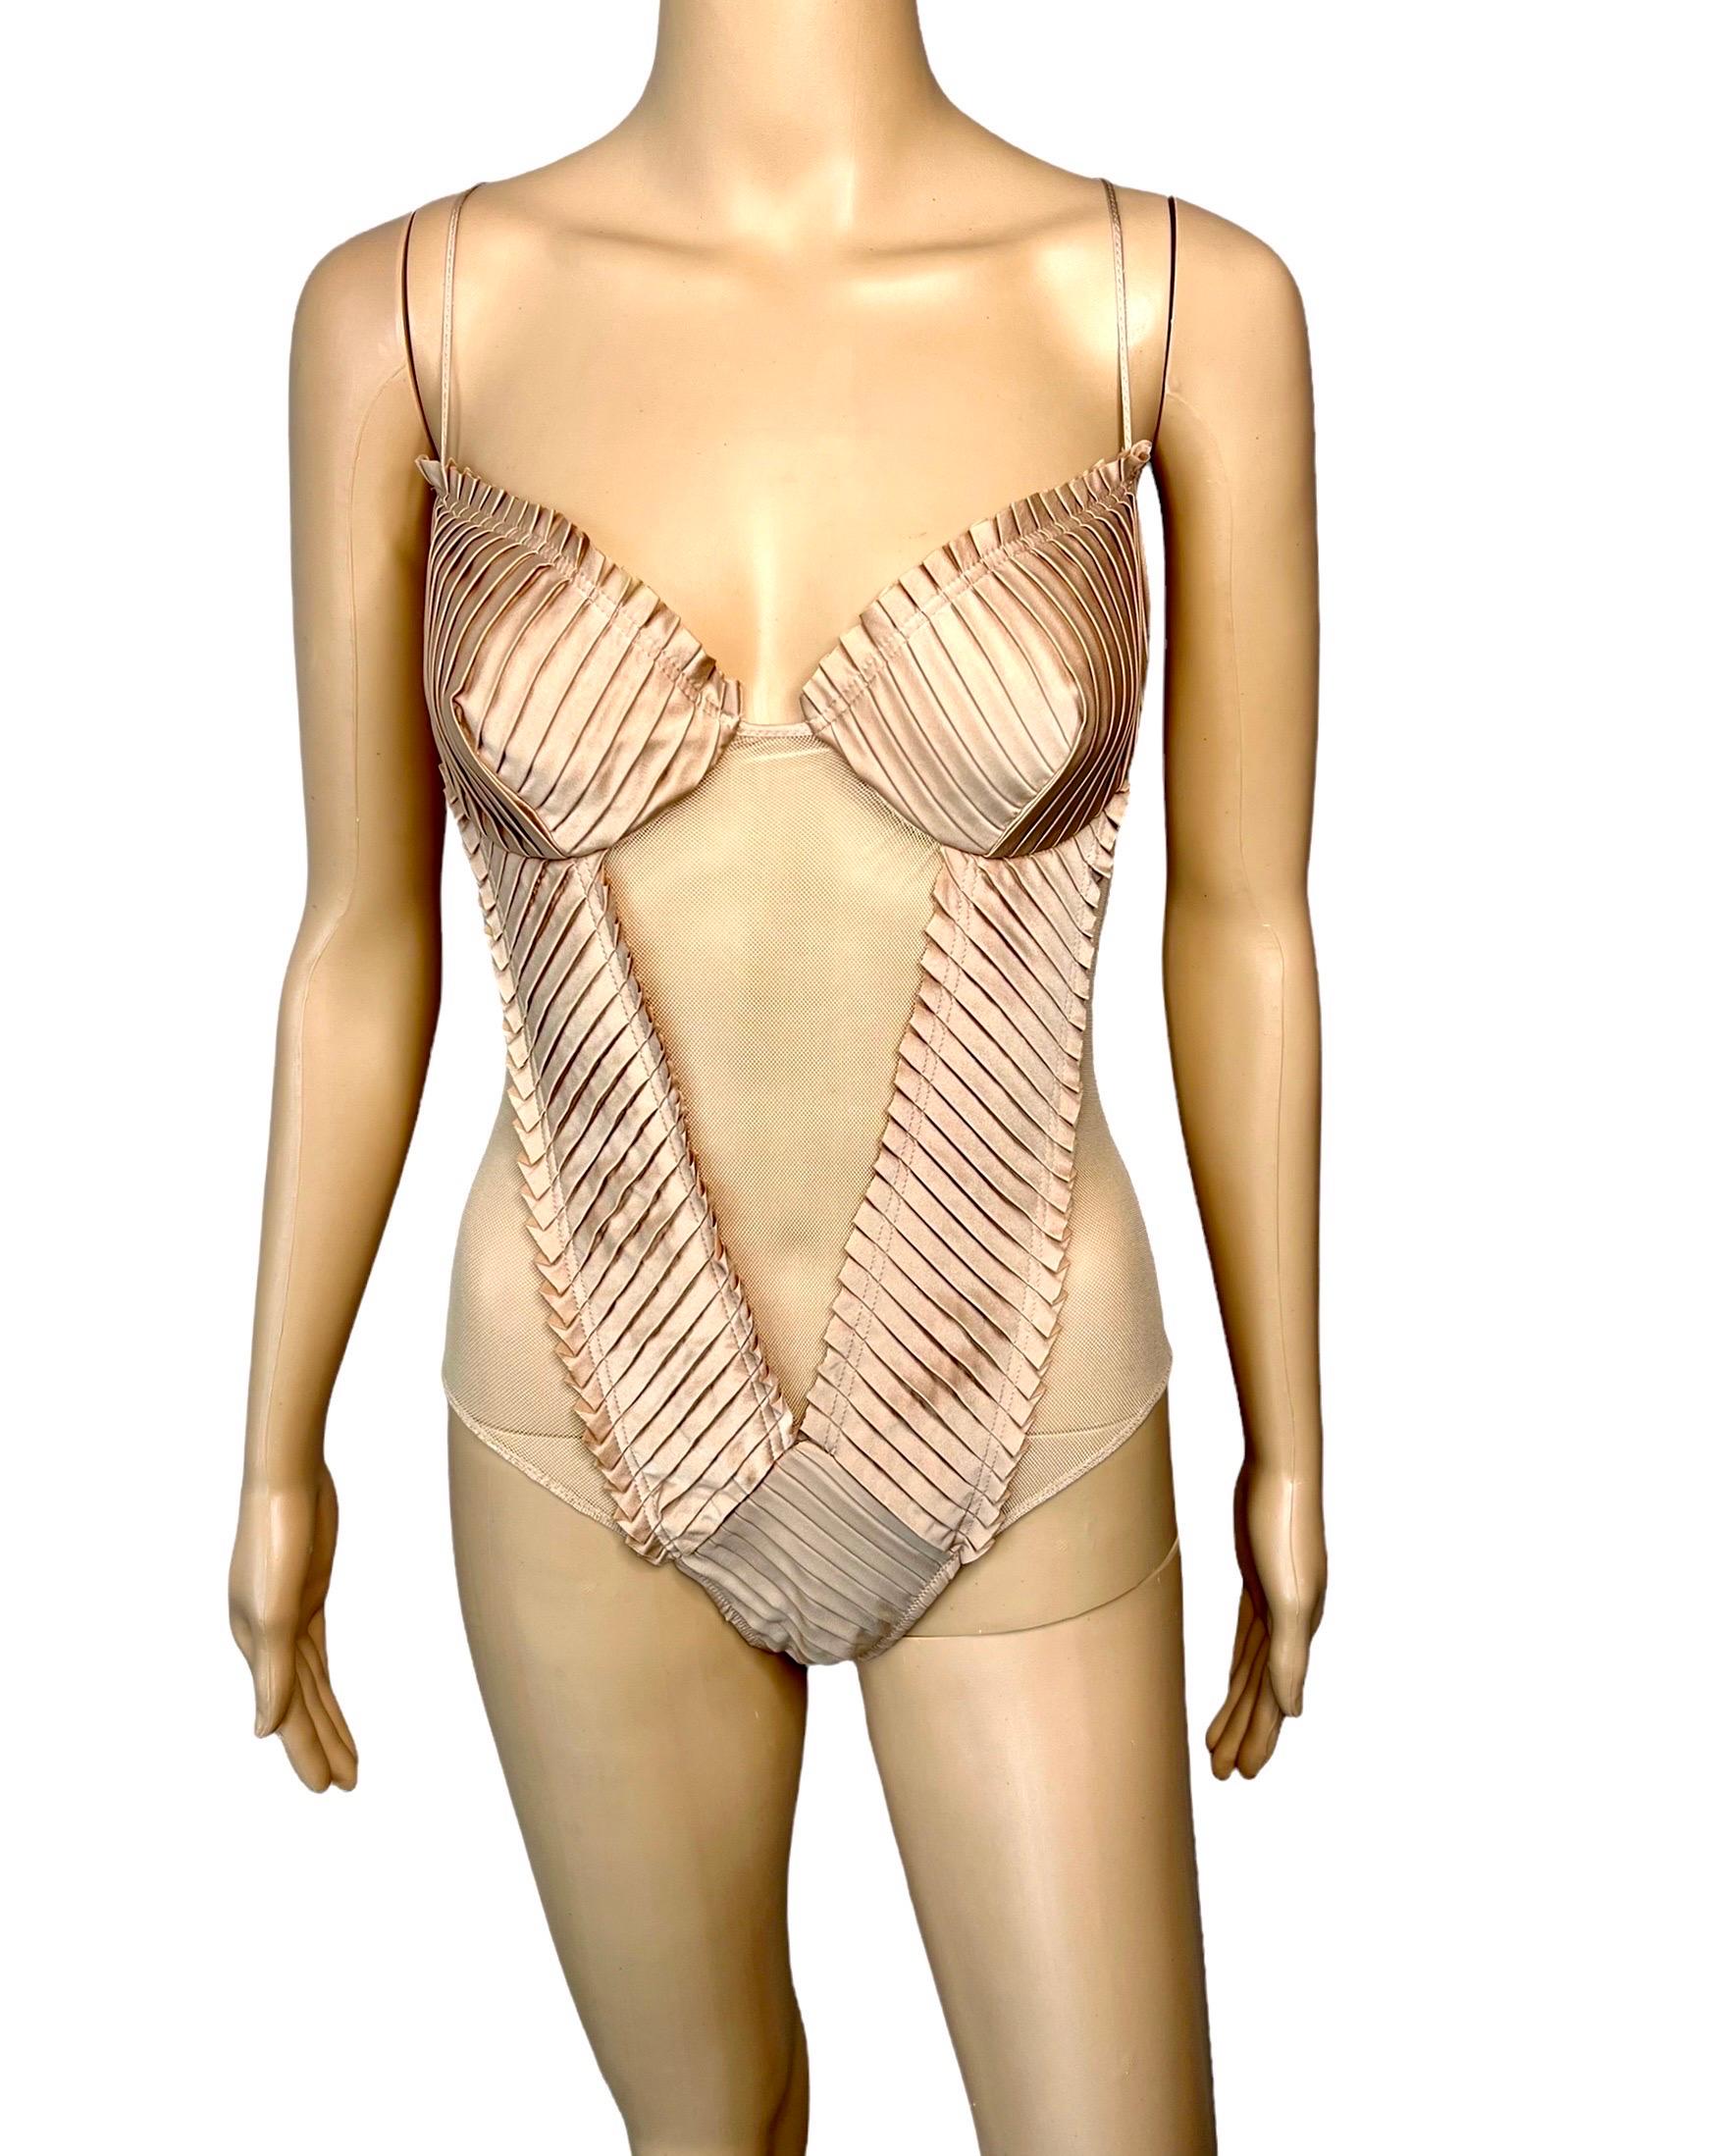 Beige Tom Ford for Gucci S/S 2004 Runway Bustier Sheer Cutout Lingerie Bodysuit Top For Sale